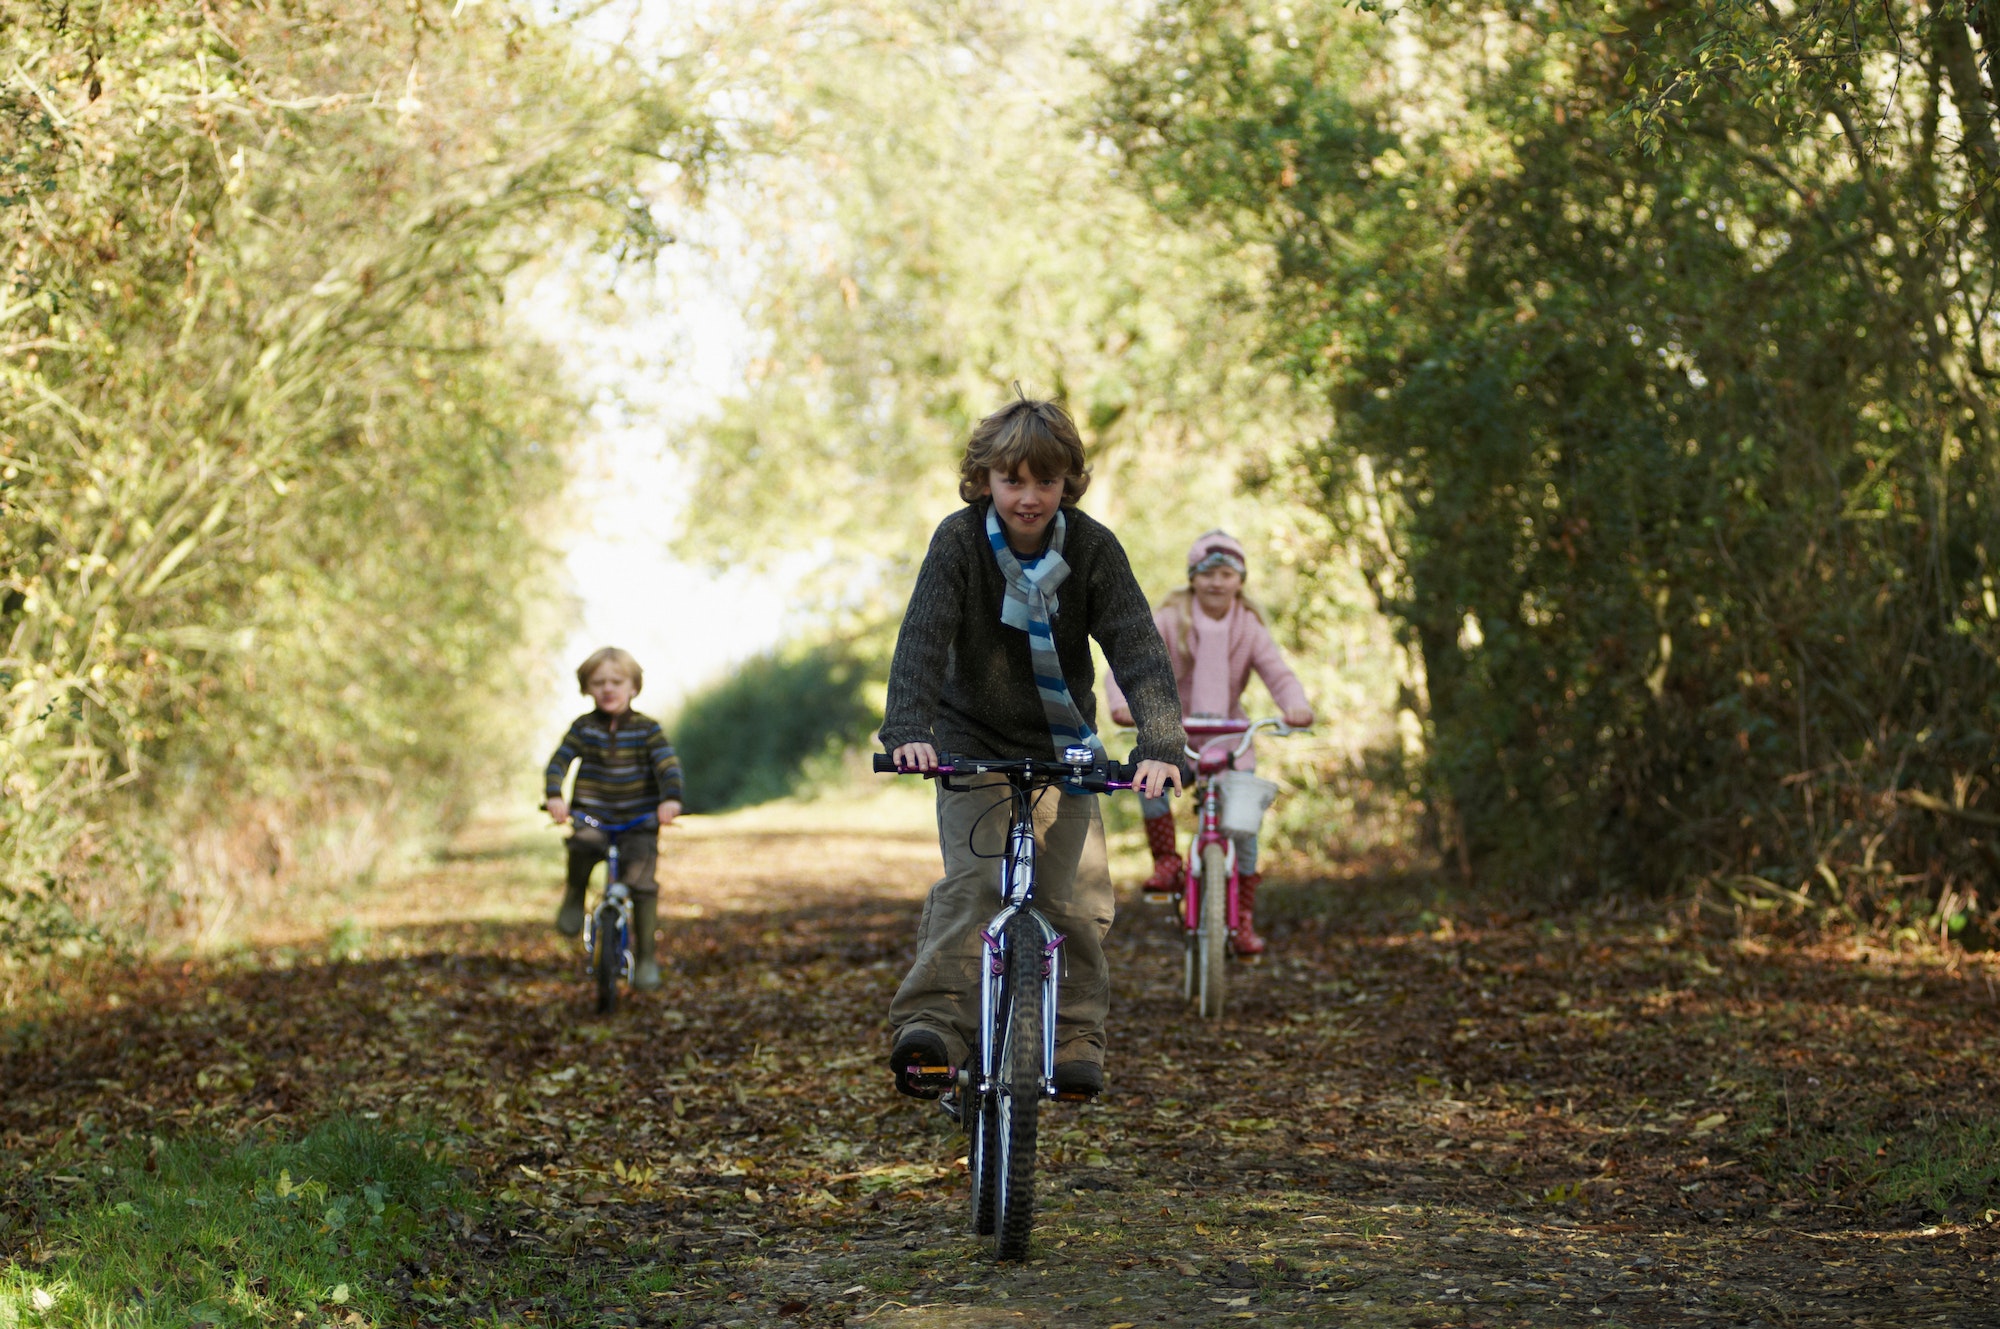 Children riding bikes in countryside